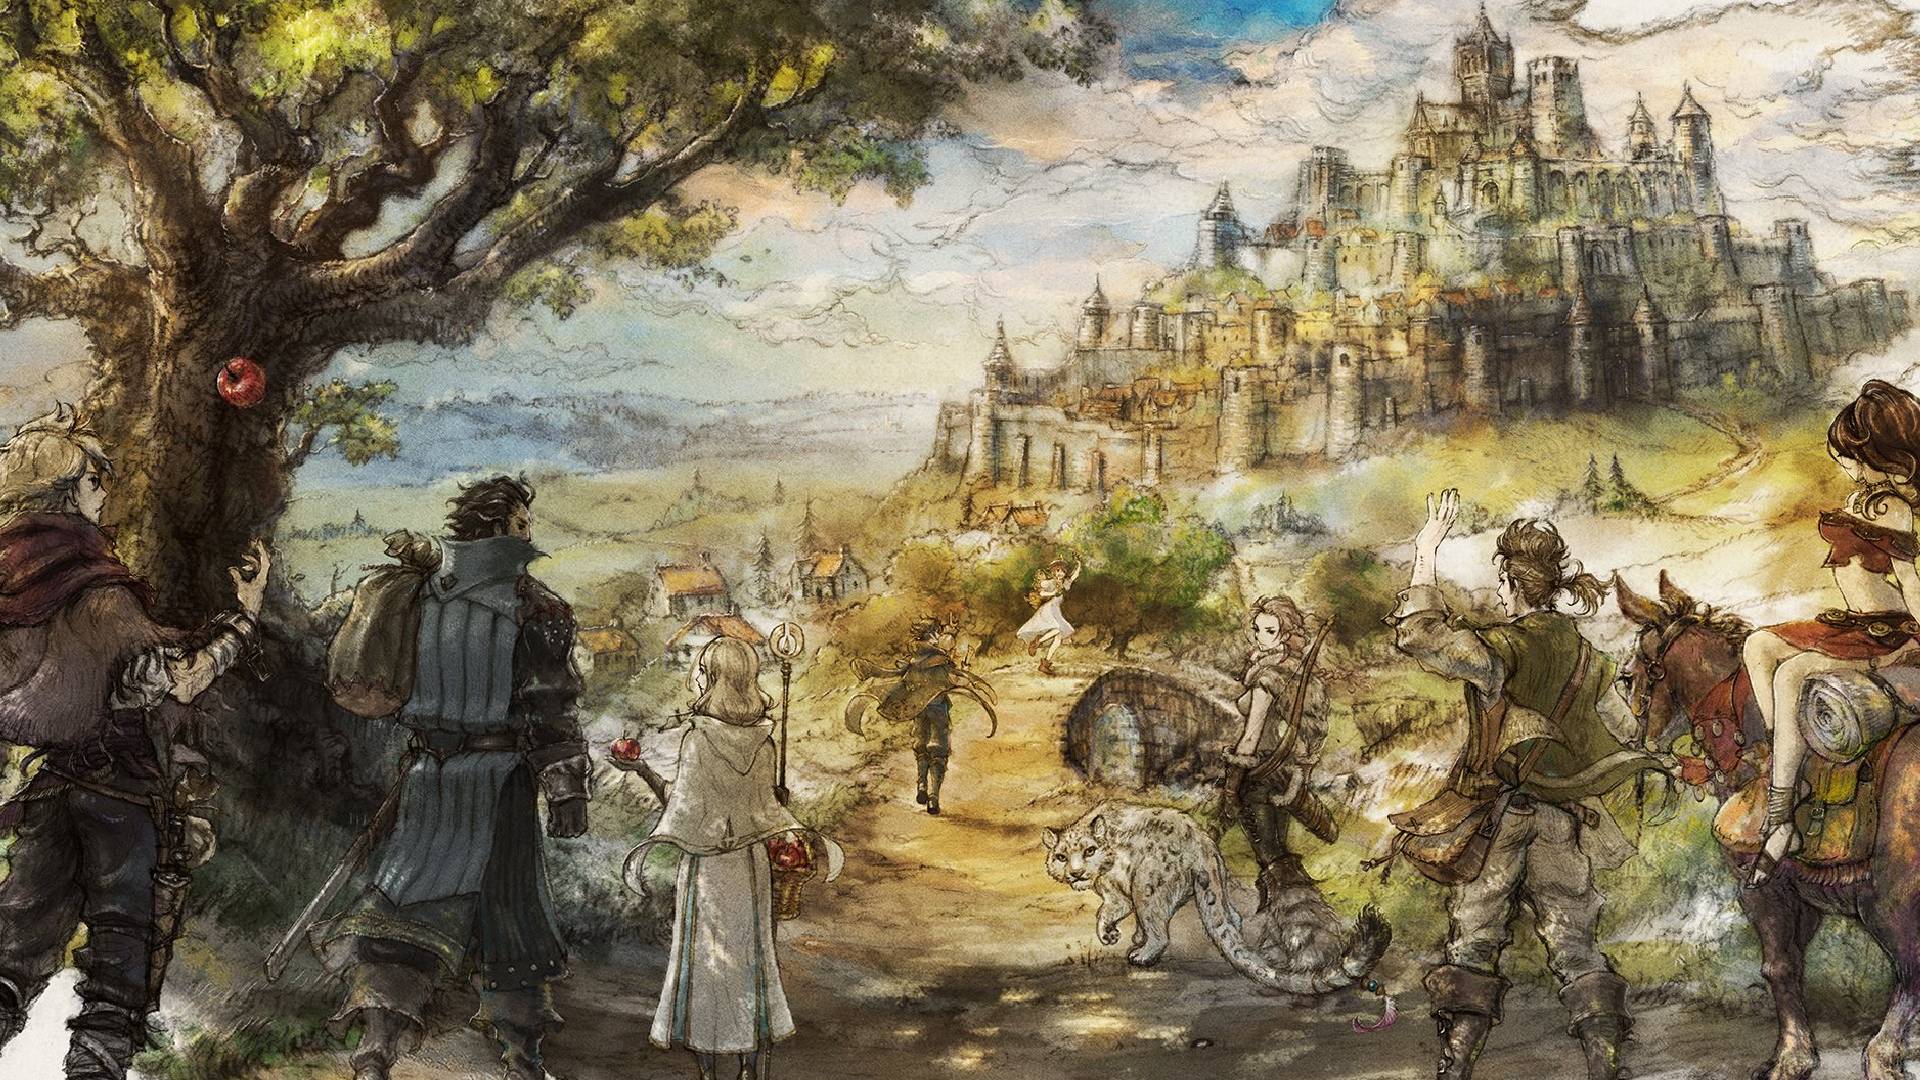 Octopath Traveler: Champions of the Continent Tier List